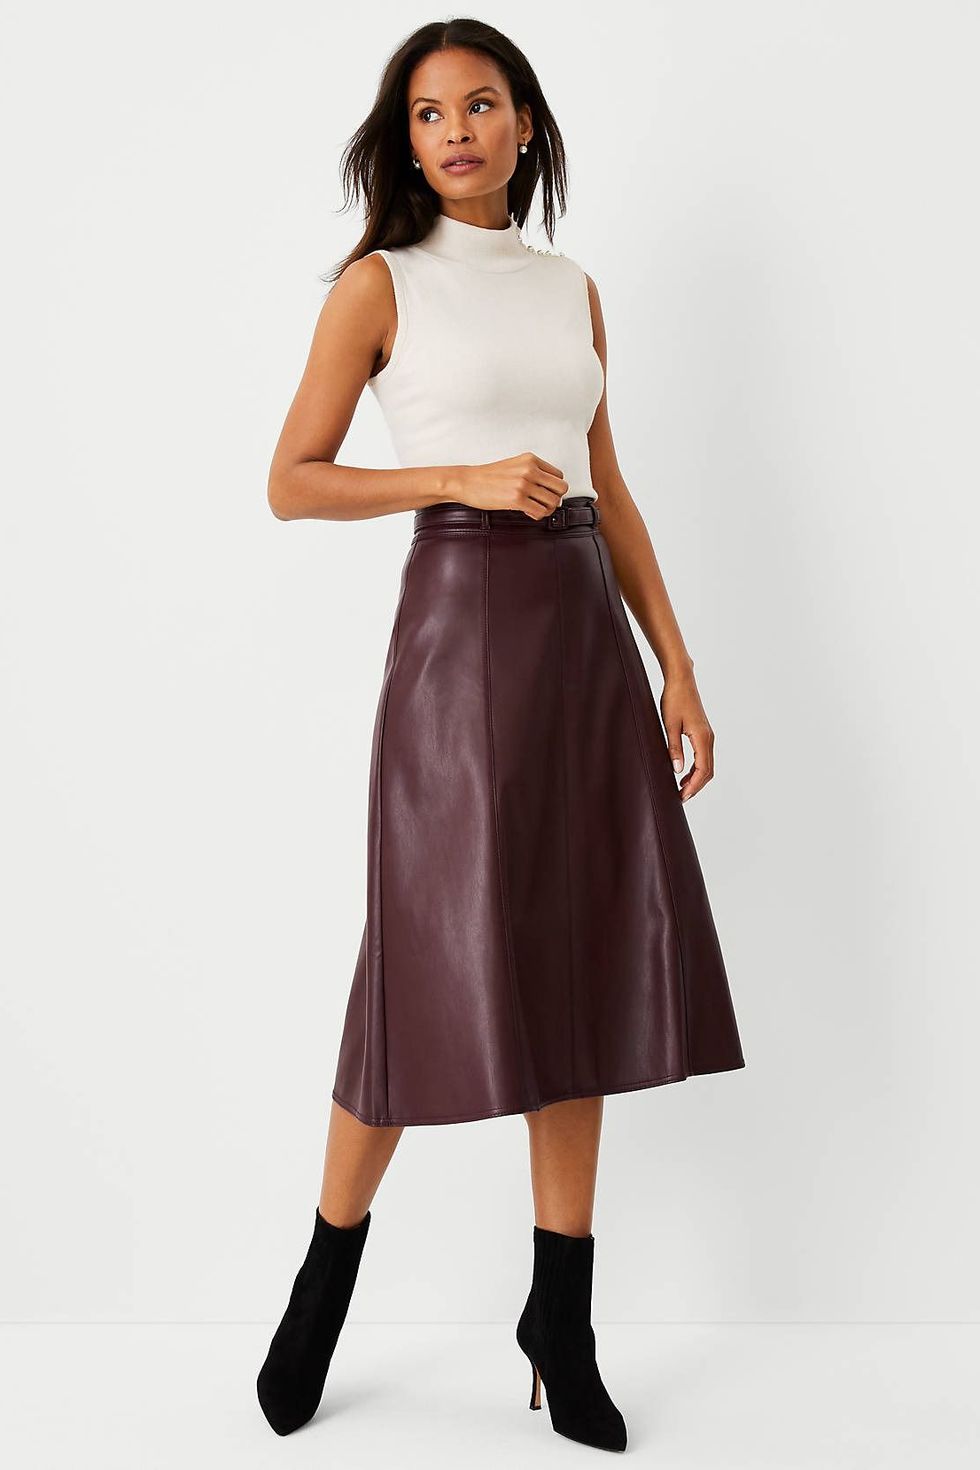 5 Stylish Ways to Wear a Leather Skater Skirt This Season